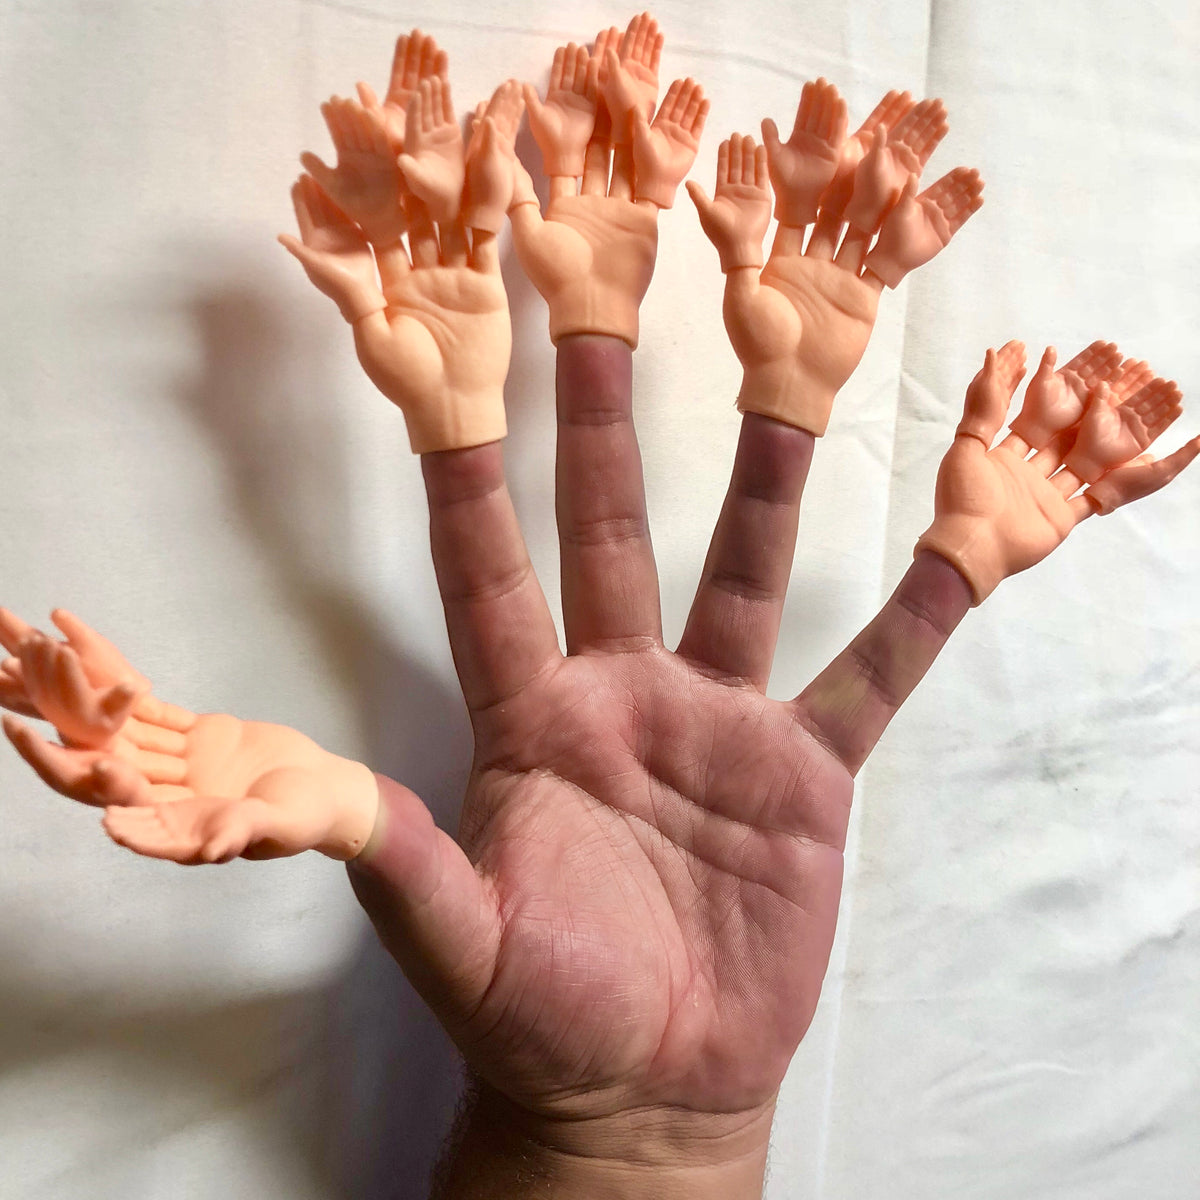 SMALL HANDS